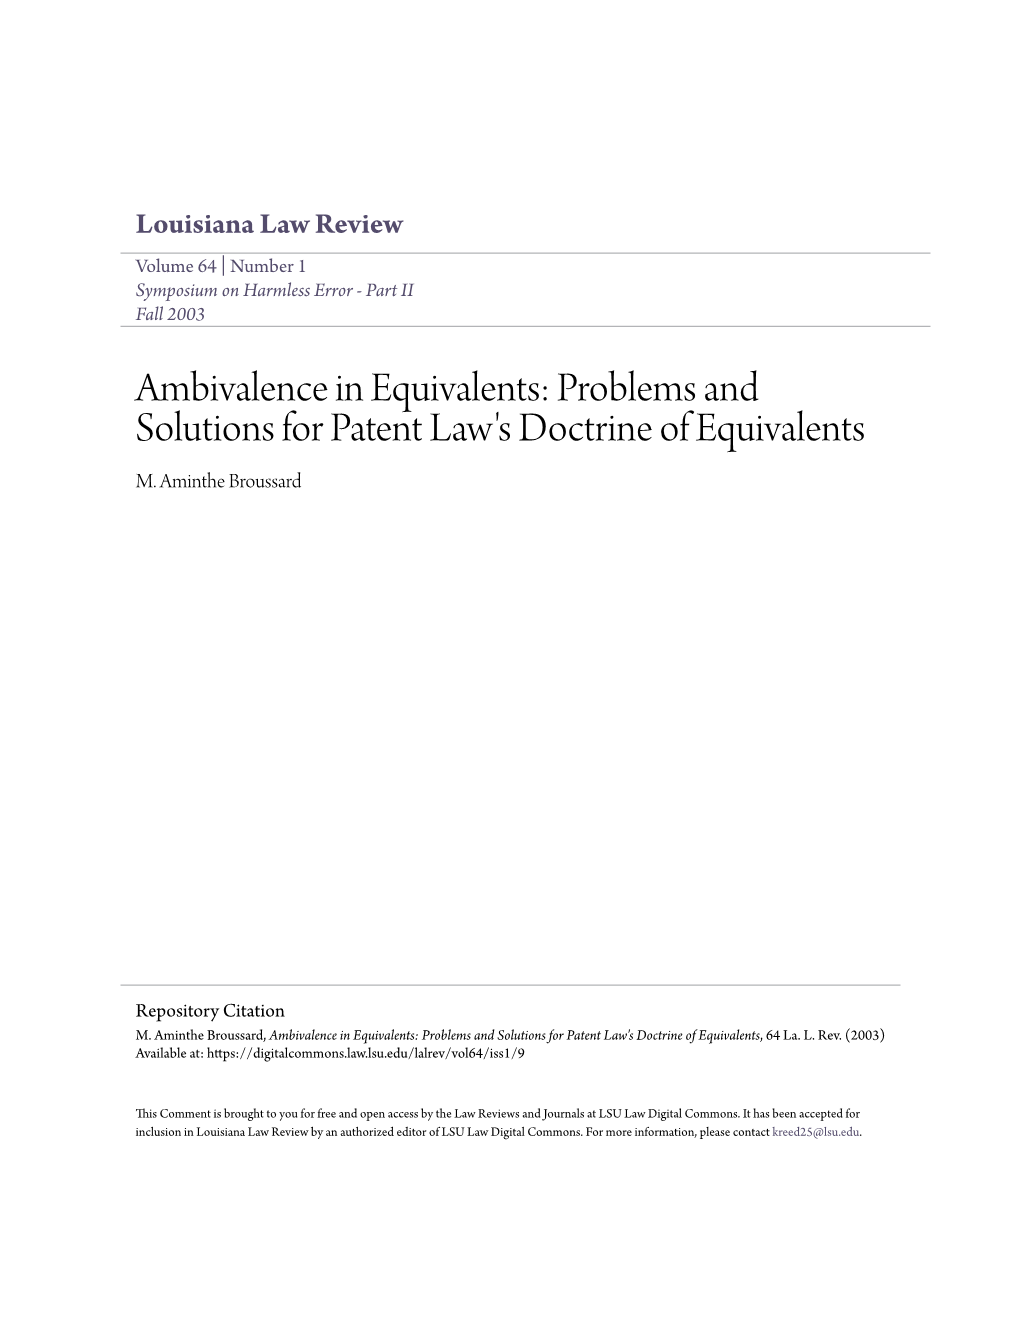 Problems and Solutions for Patent Law's Doctrine of Equivalents M